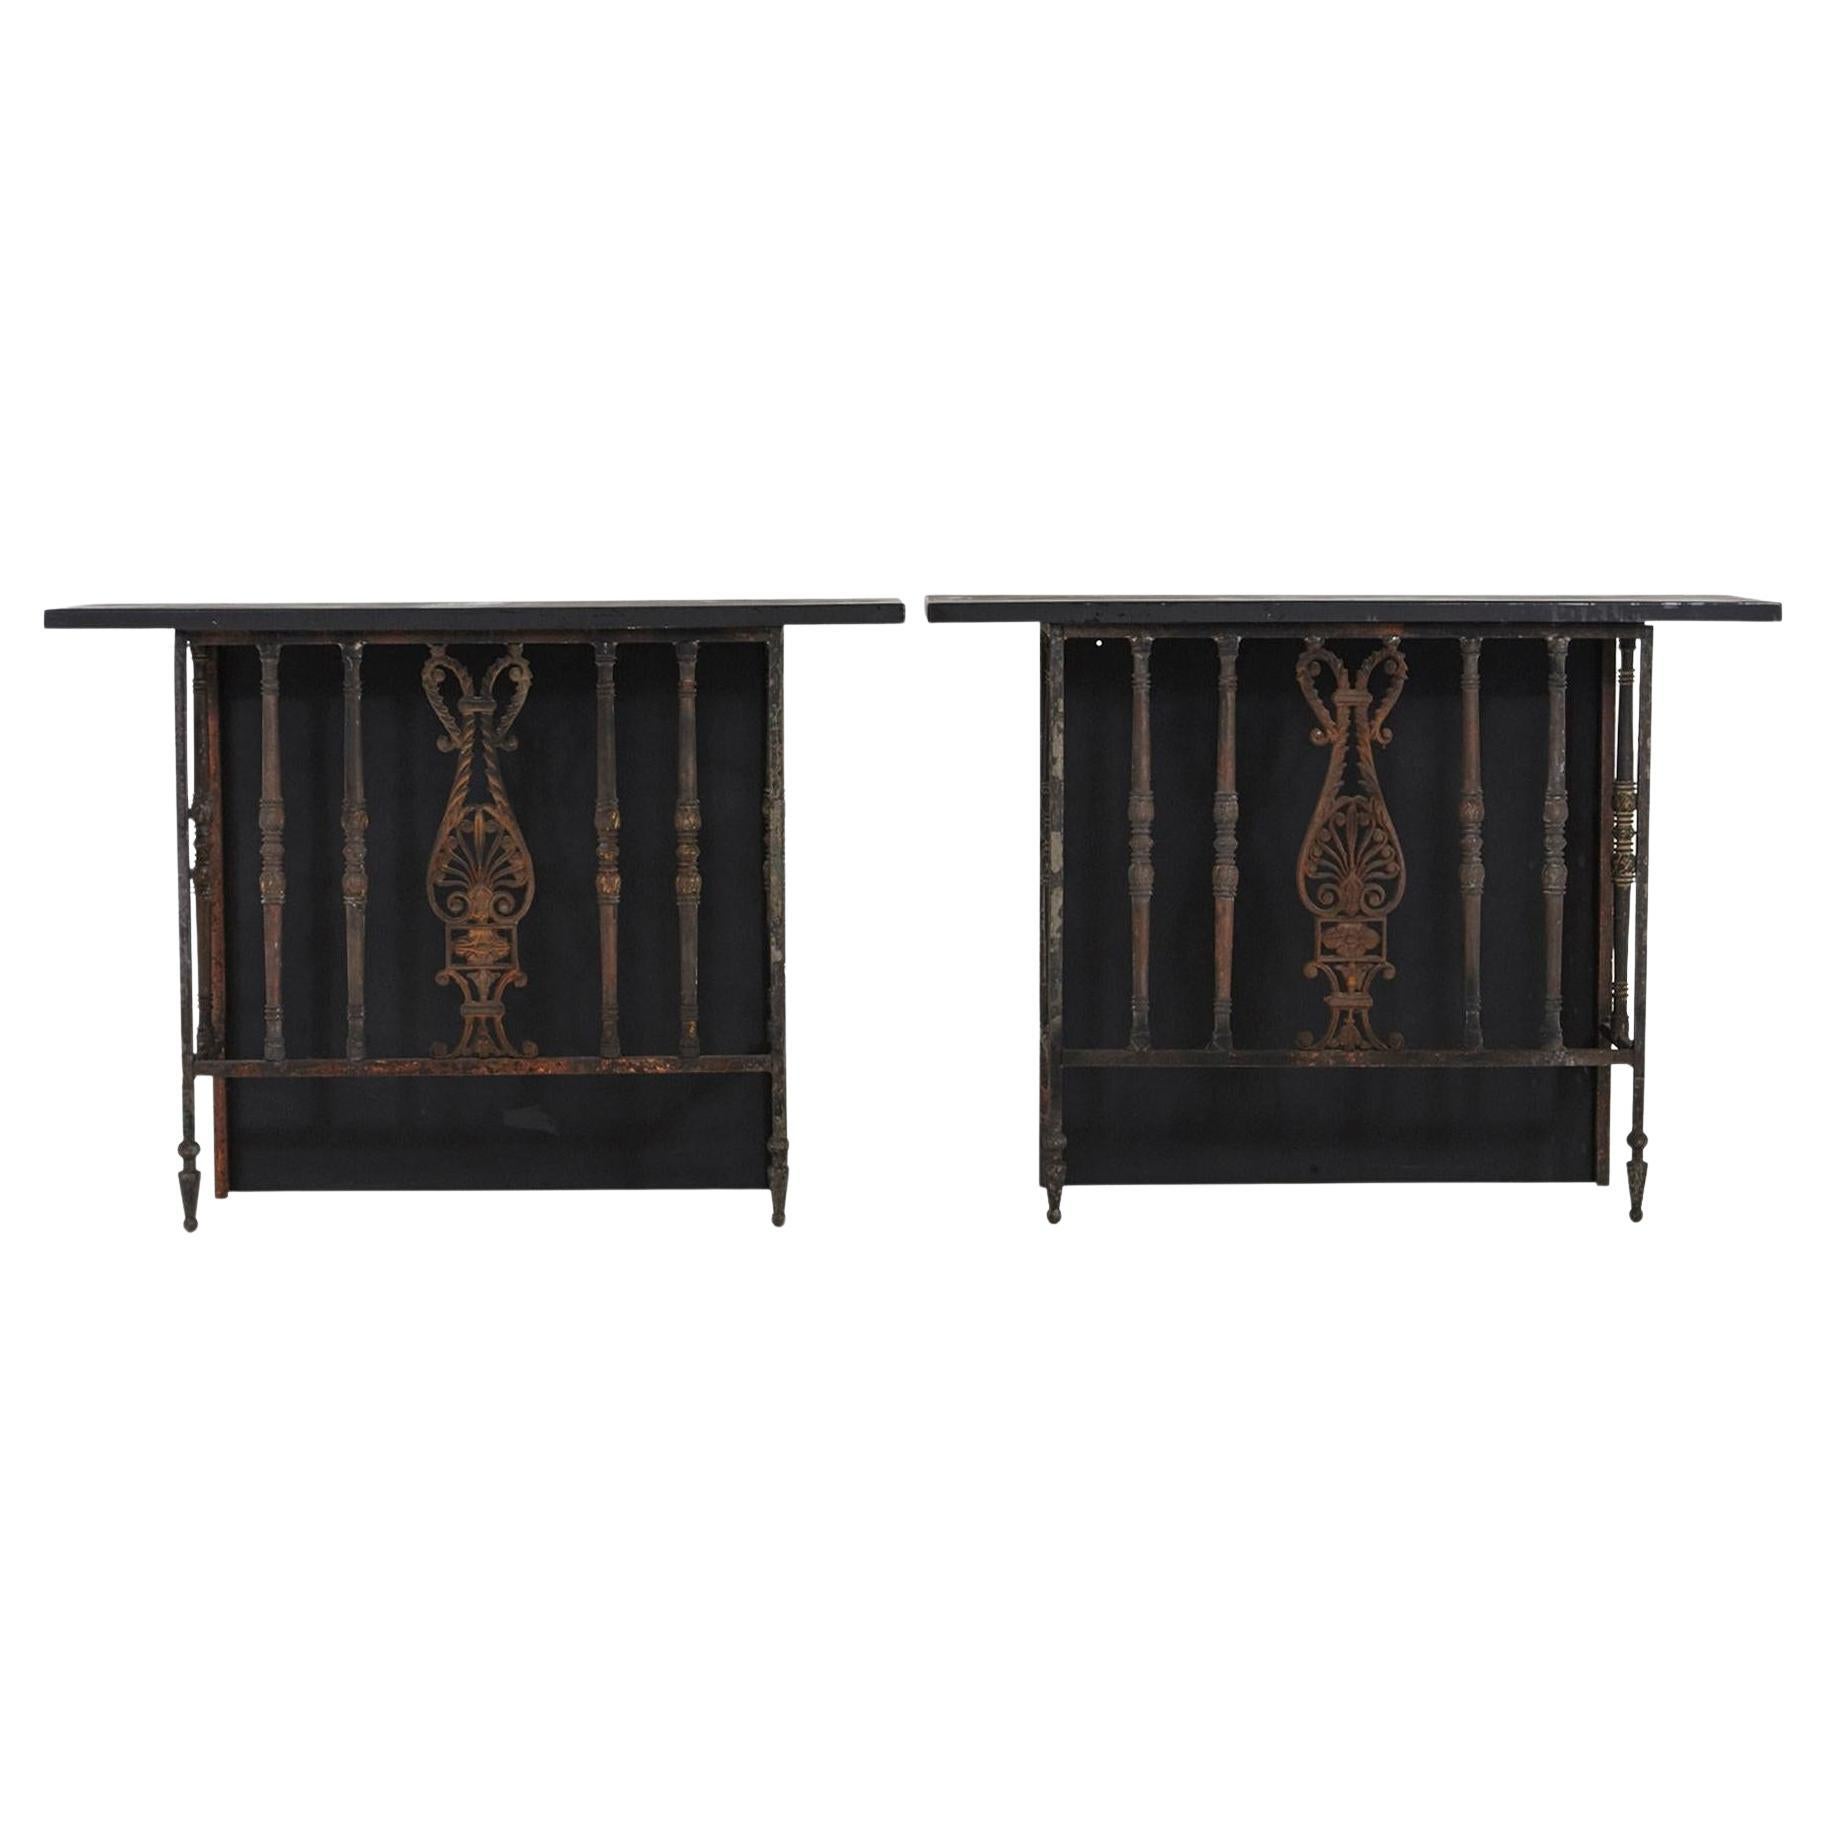 Pair of French Wrought Iron Balcony Railings Transformed into Custom Consoles